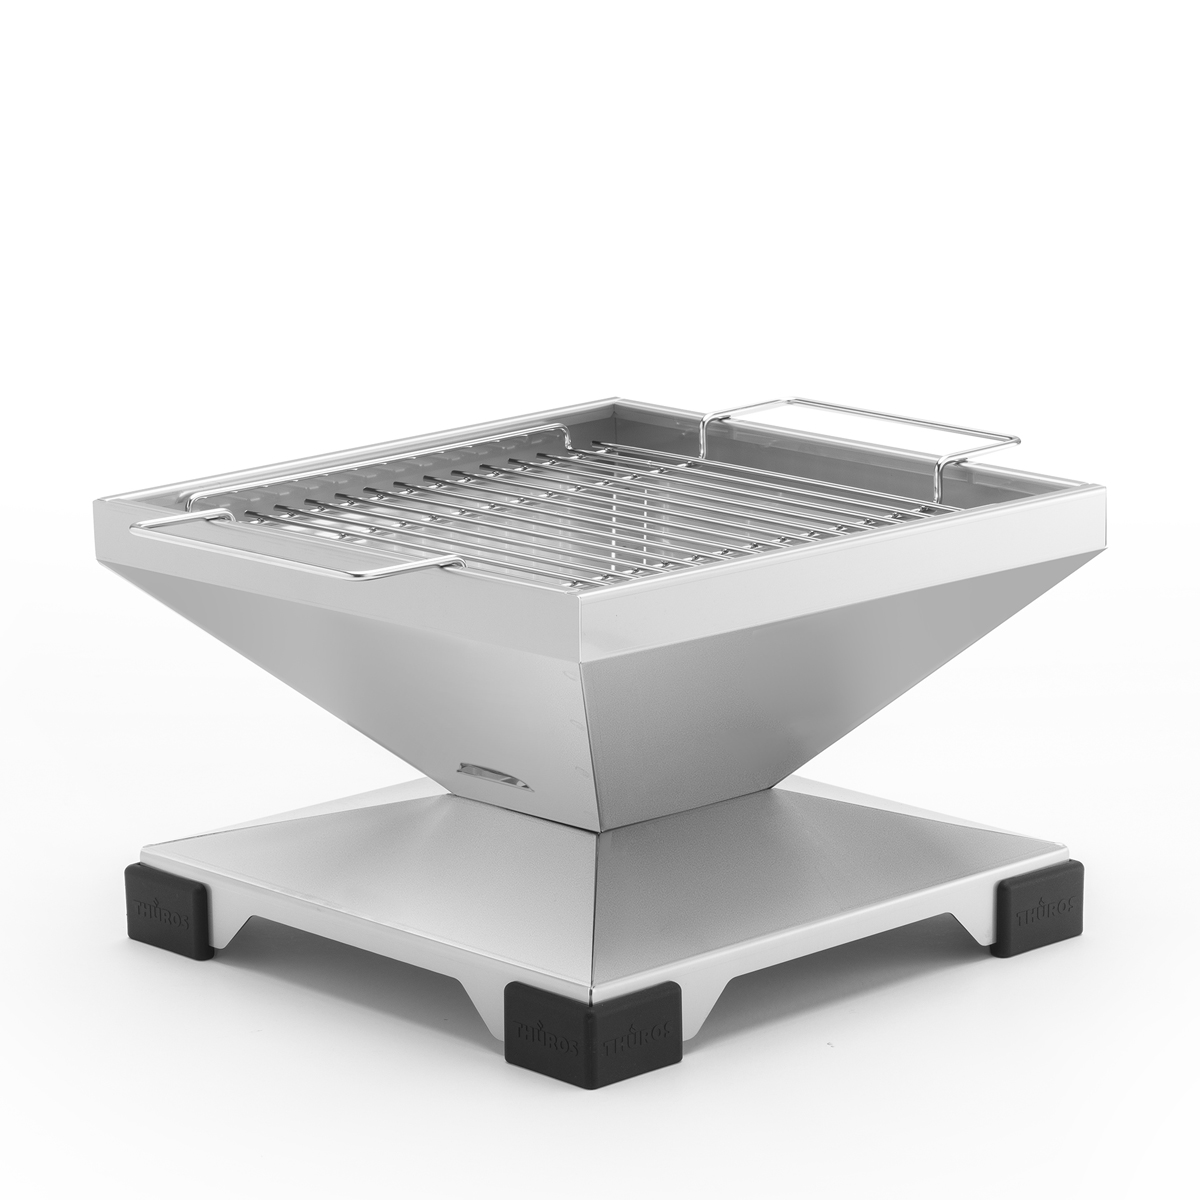 THÜROS T2 Stainless Steel Tabletop Barbecue